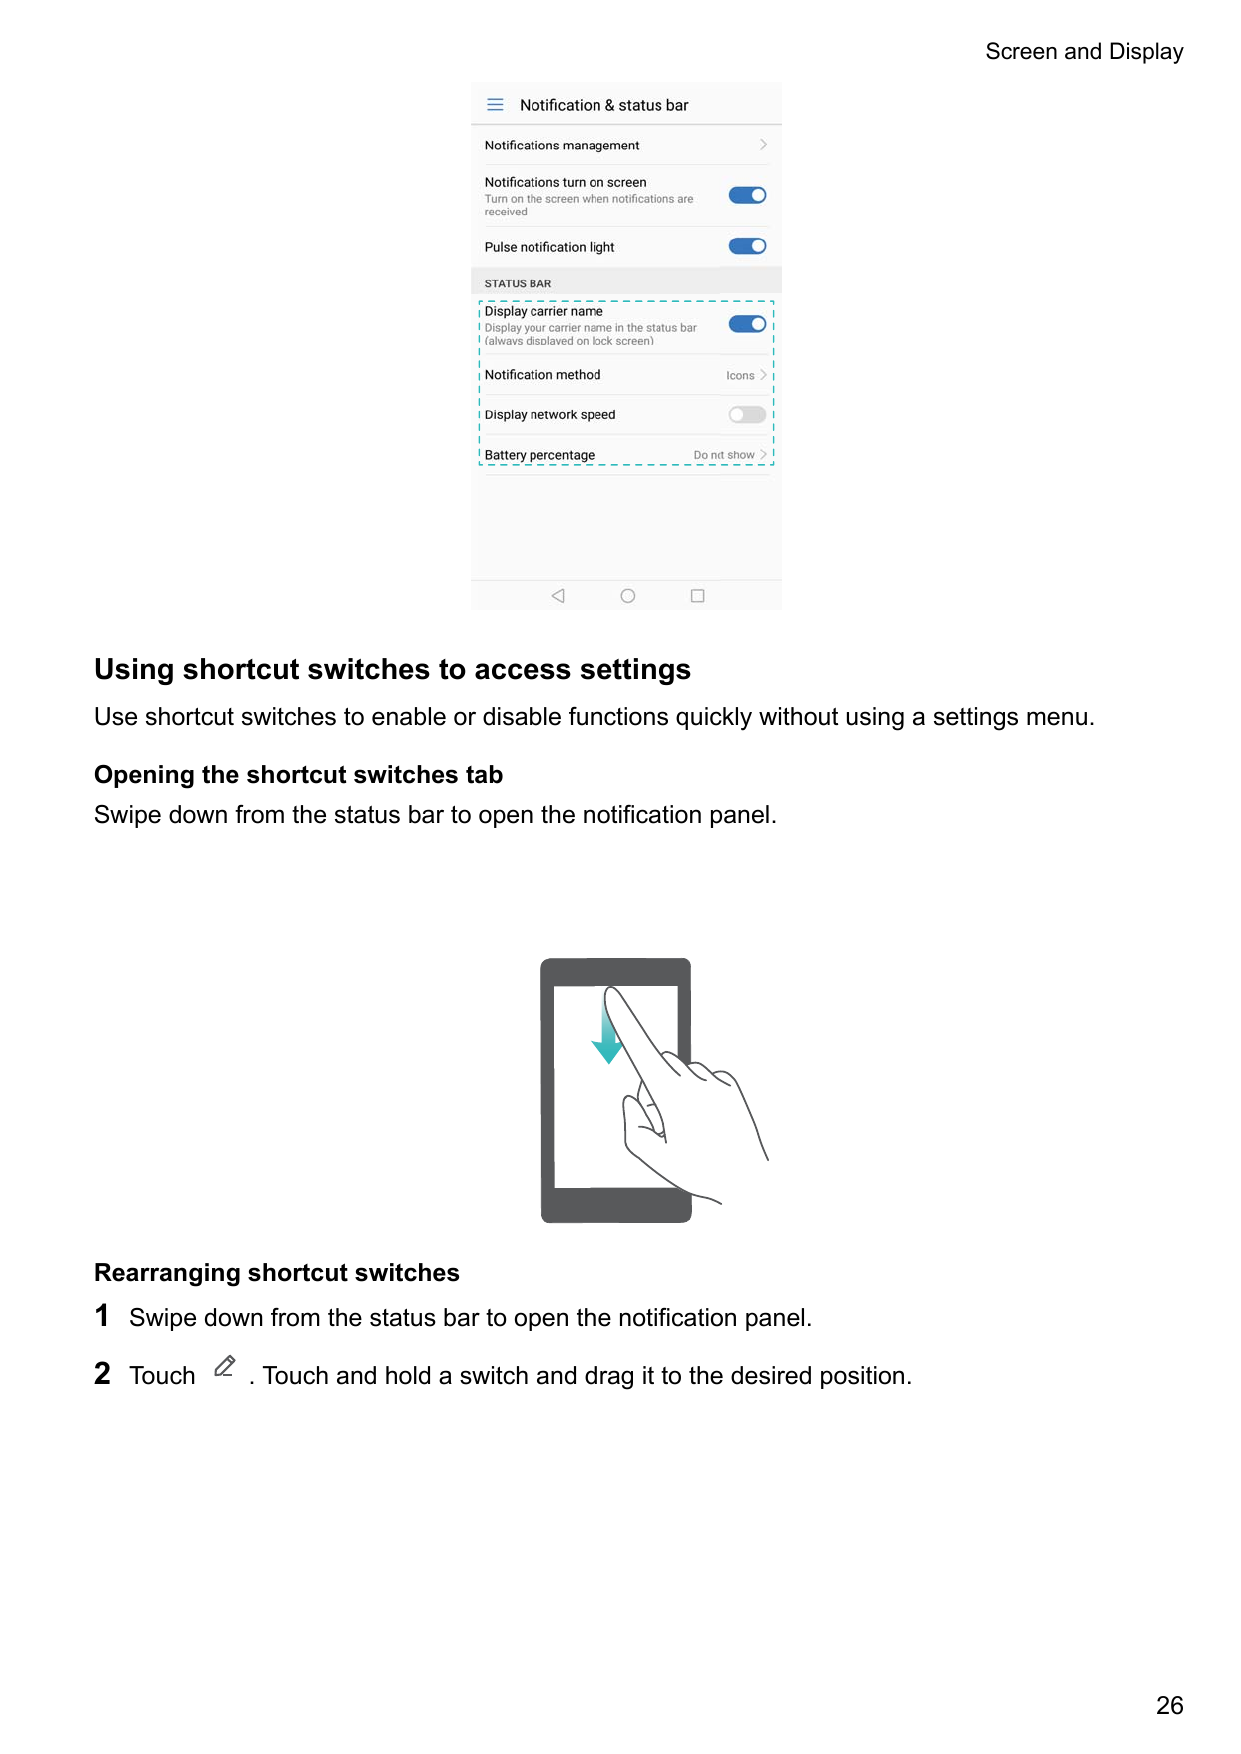 Screen and DisplayUsing shortcut switches to access settingsUse shortcut switches to enable or disable functions quickly without